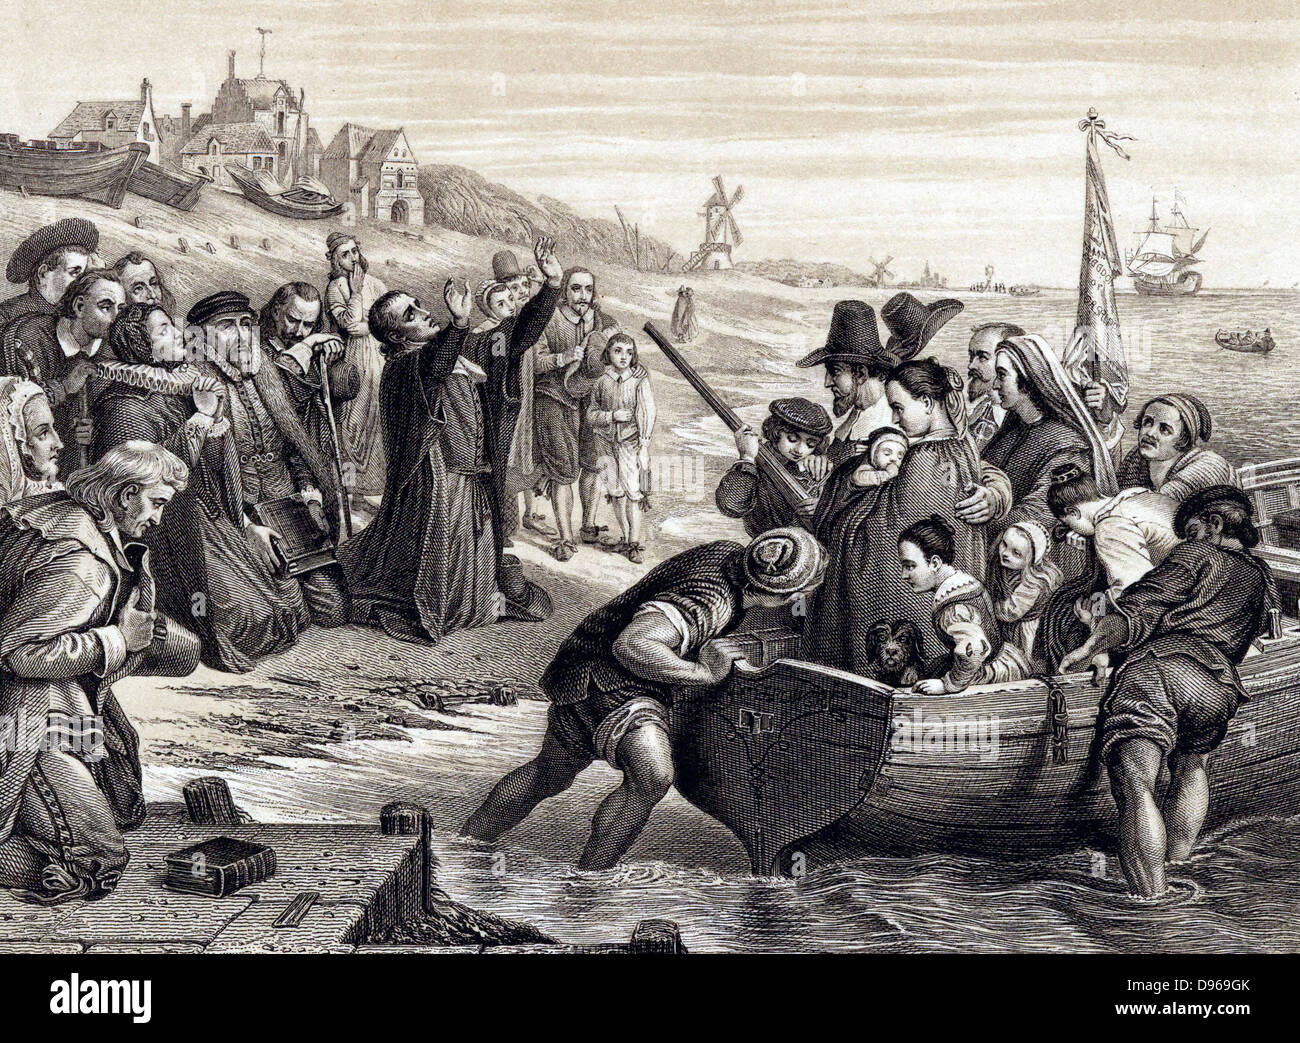 Pilgrim Fathers, members of English Separatist Church sect of Puritans,  leaving Delft Haven on their voyage to America July 1620. 1878 engraving after fresco by CW Cope. Stock Photo